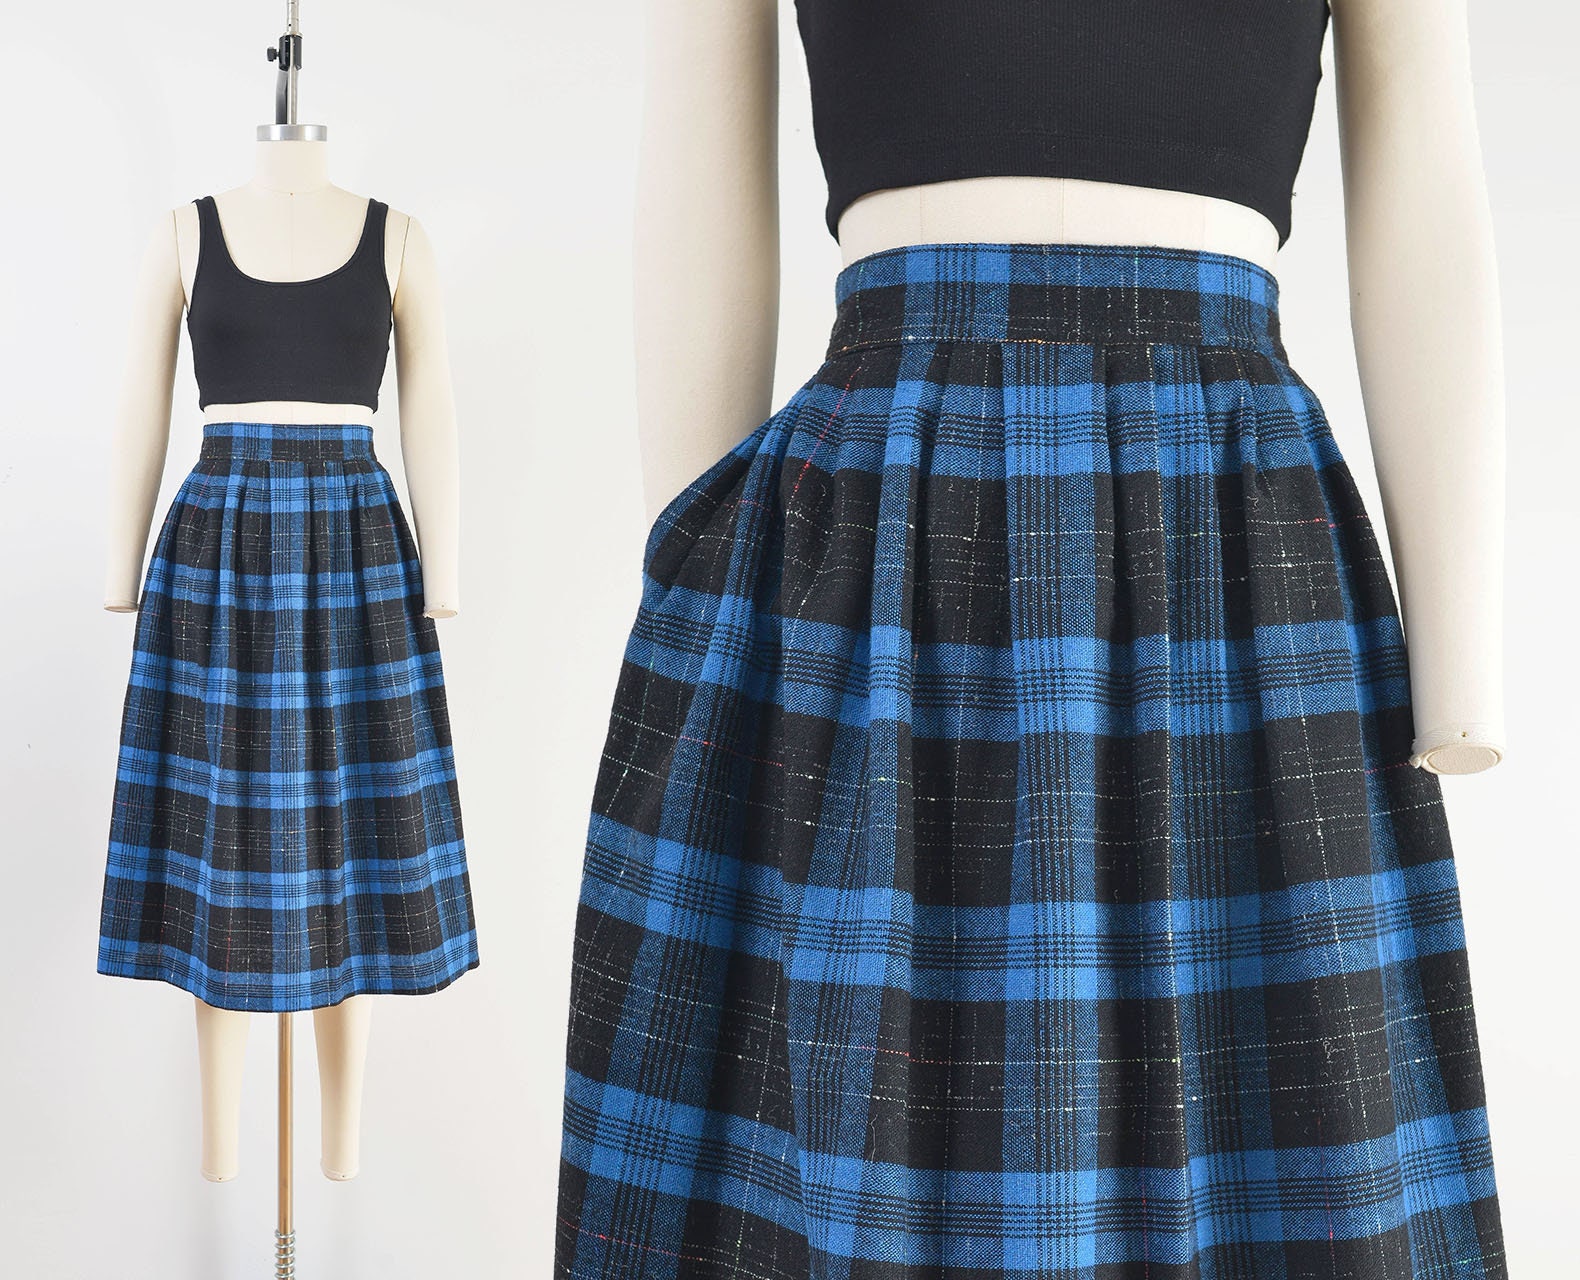 Vintage 1950s Plaid Cotton Pleated Full Skirt Size S, 41% OFF